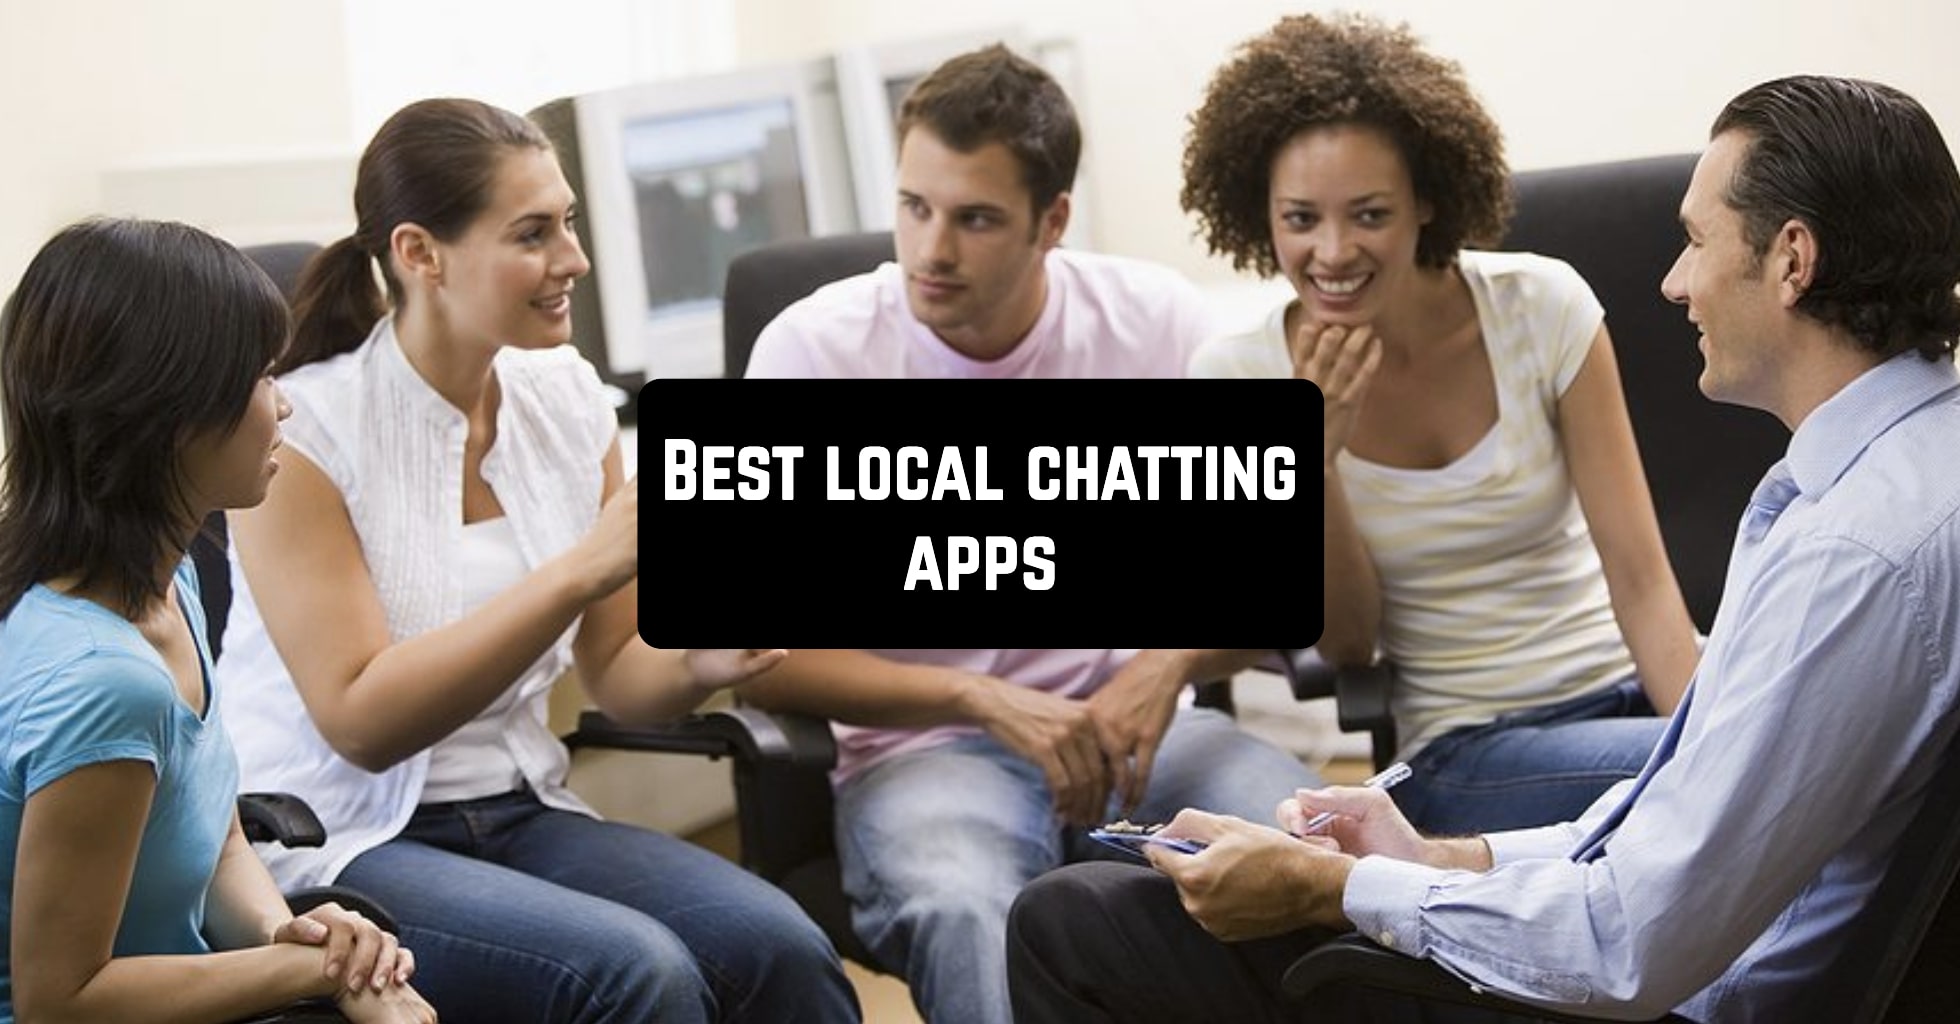 11 Best local chatting apps for Android & iOS